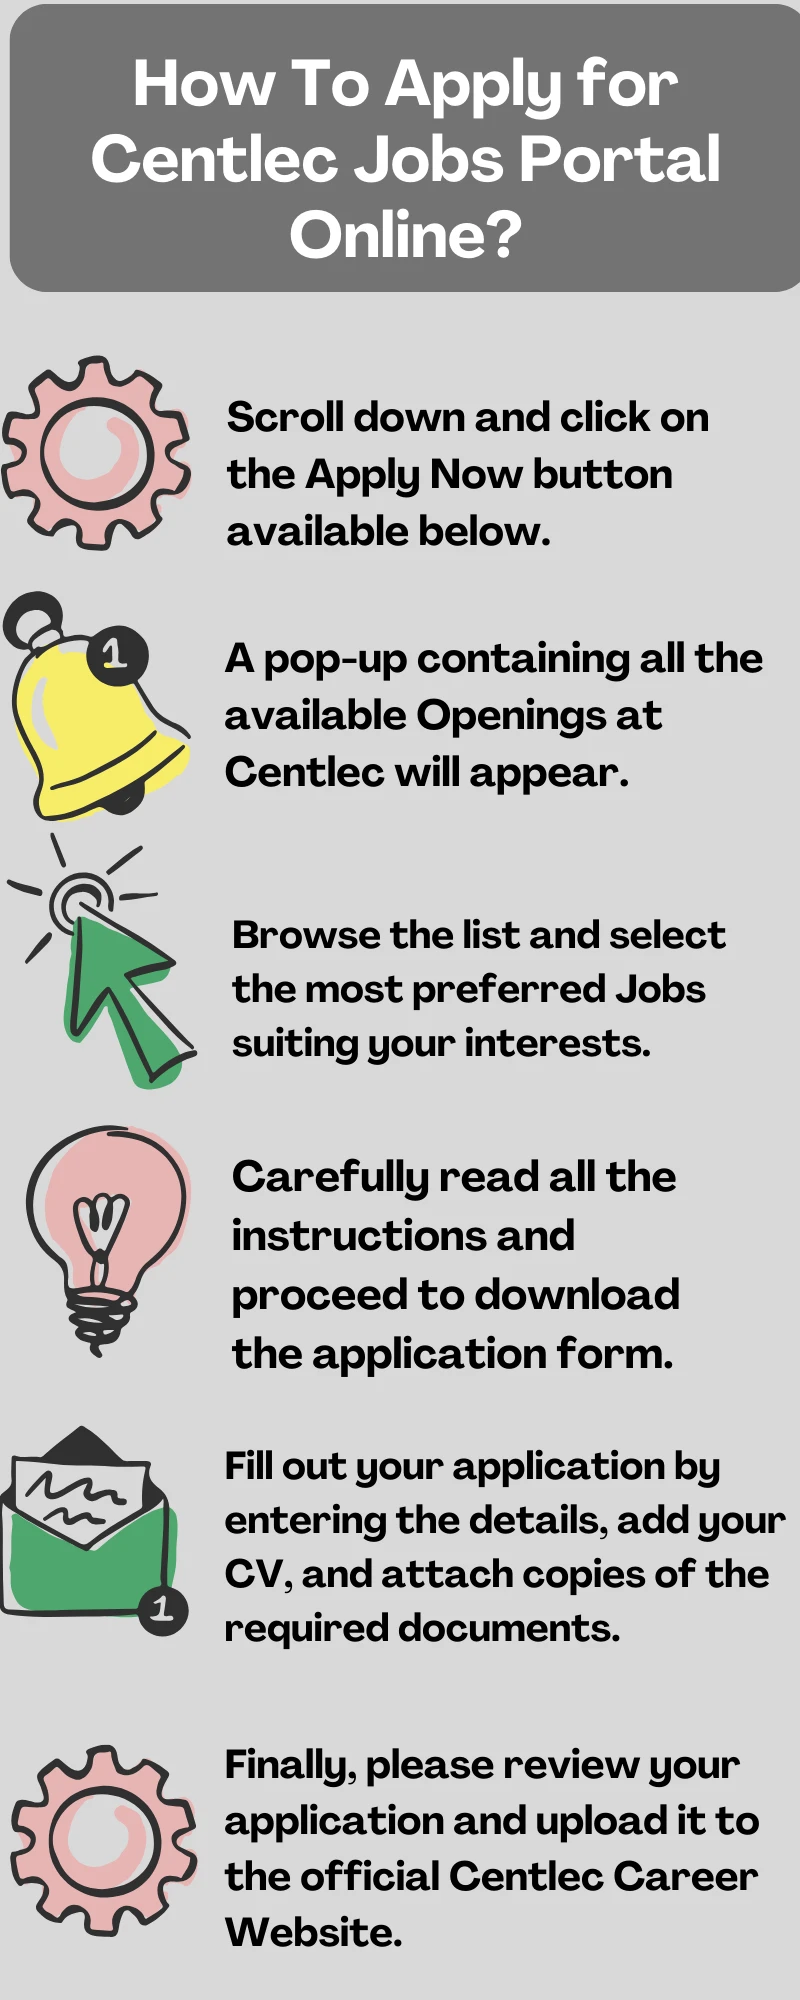 How To Apply for Centlec Jobs Portal Online?